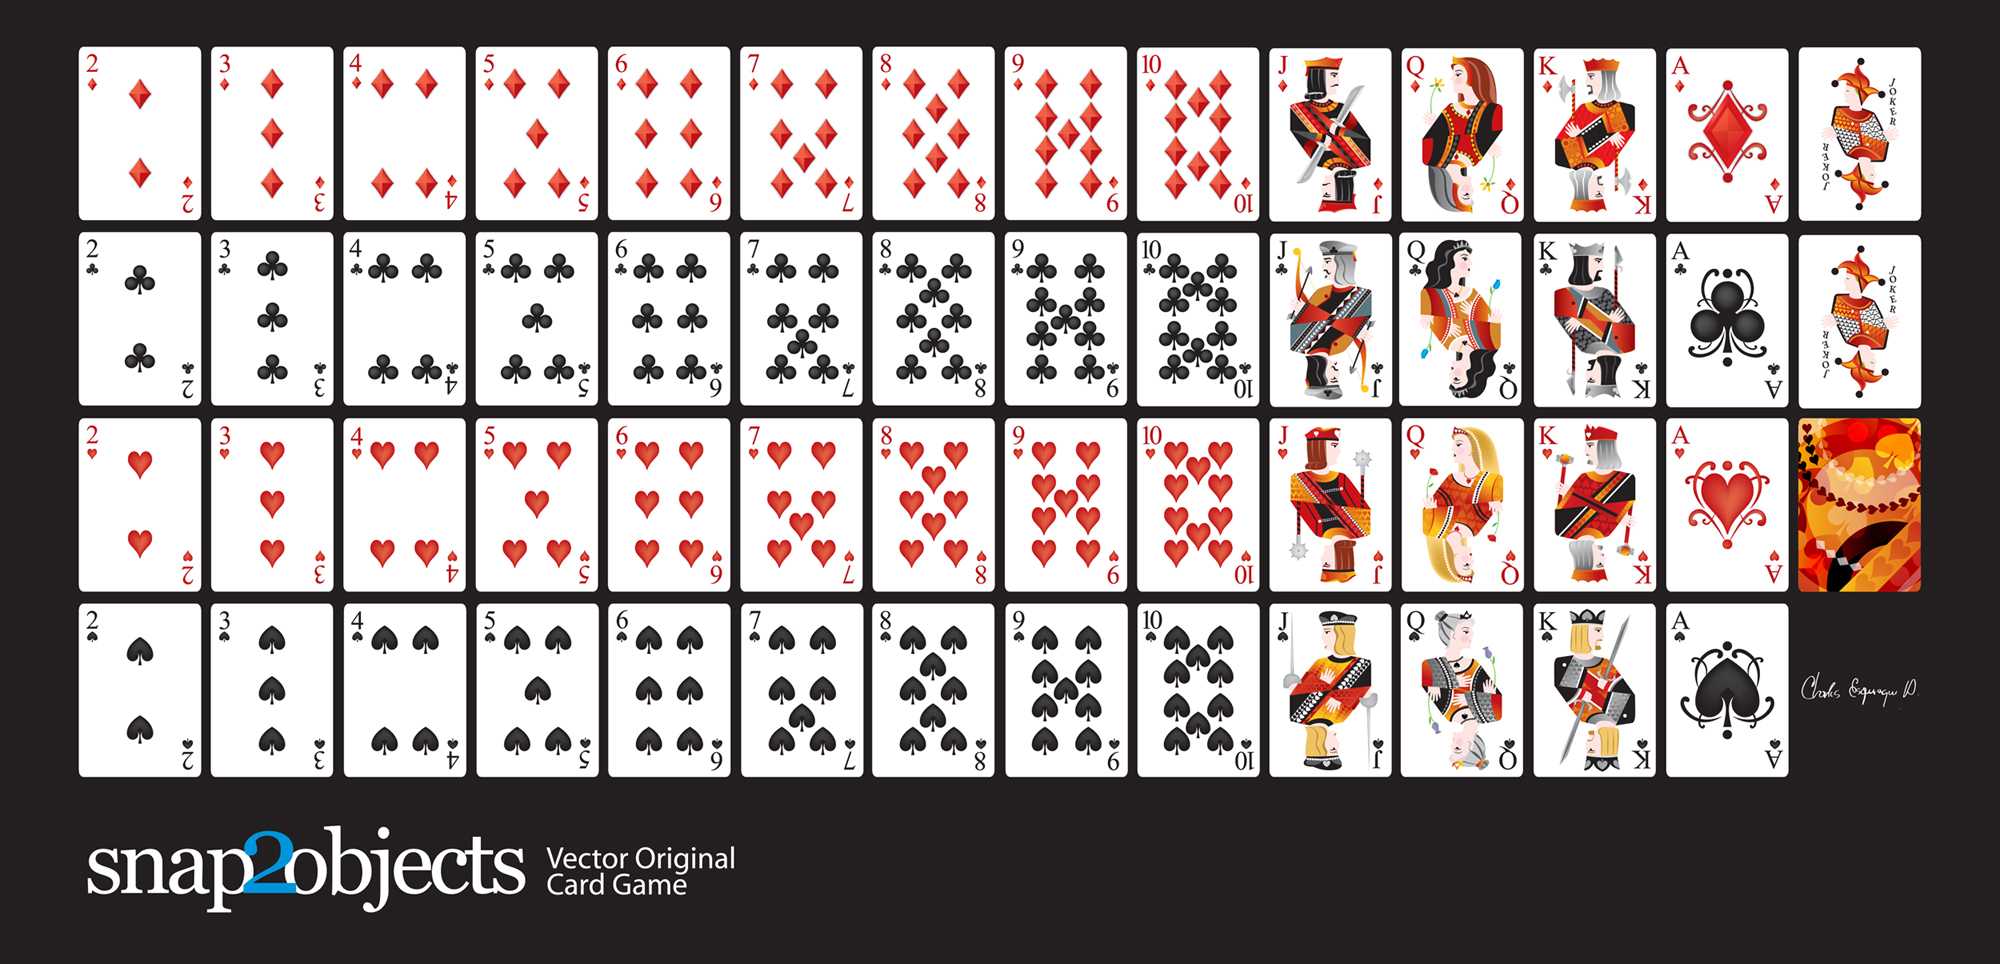 Playing Card Vector Art At Getdrawings | Free Download Within Playing Card Design Template